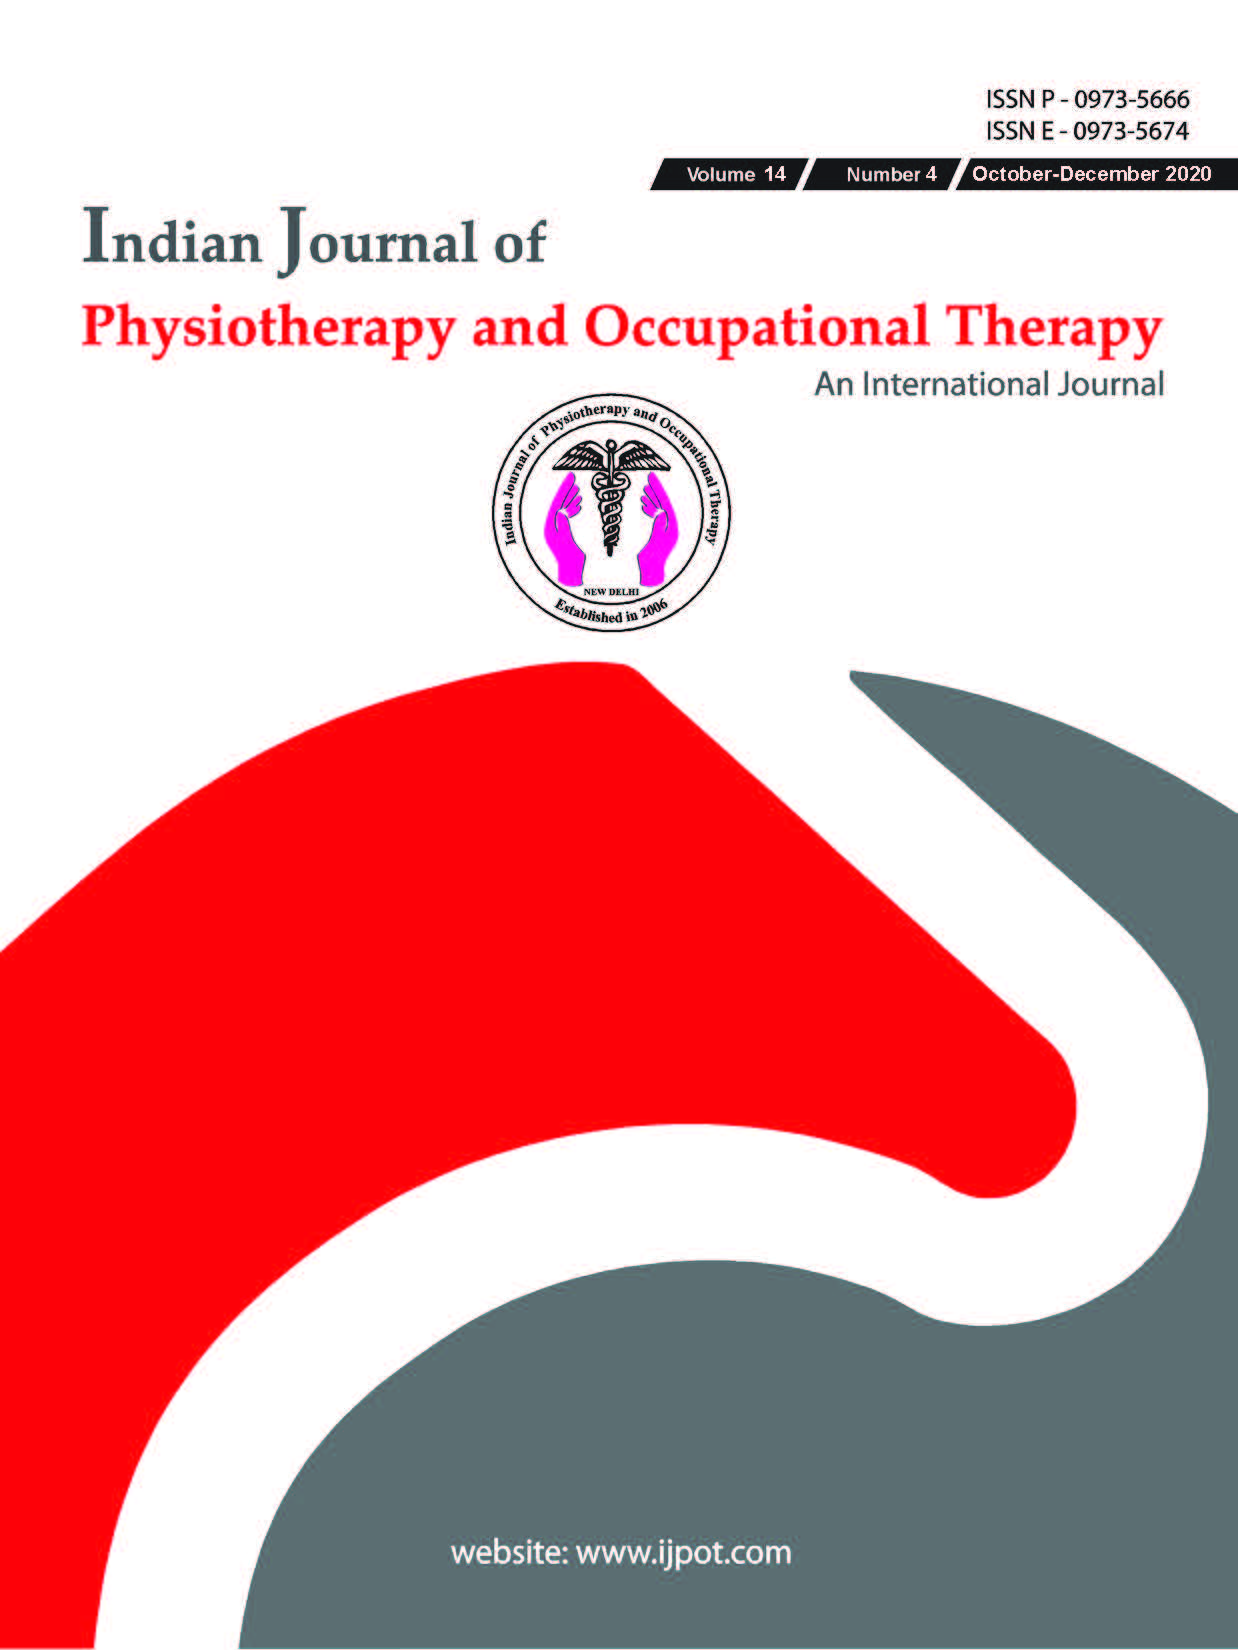 					View Vol. 14 No. 4 (2020): Indian Journal of Physiotherapy & Occupational Therapy
				